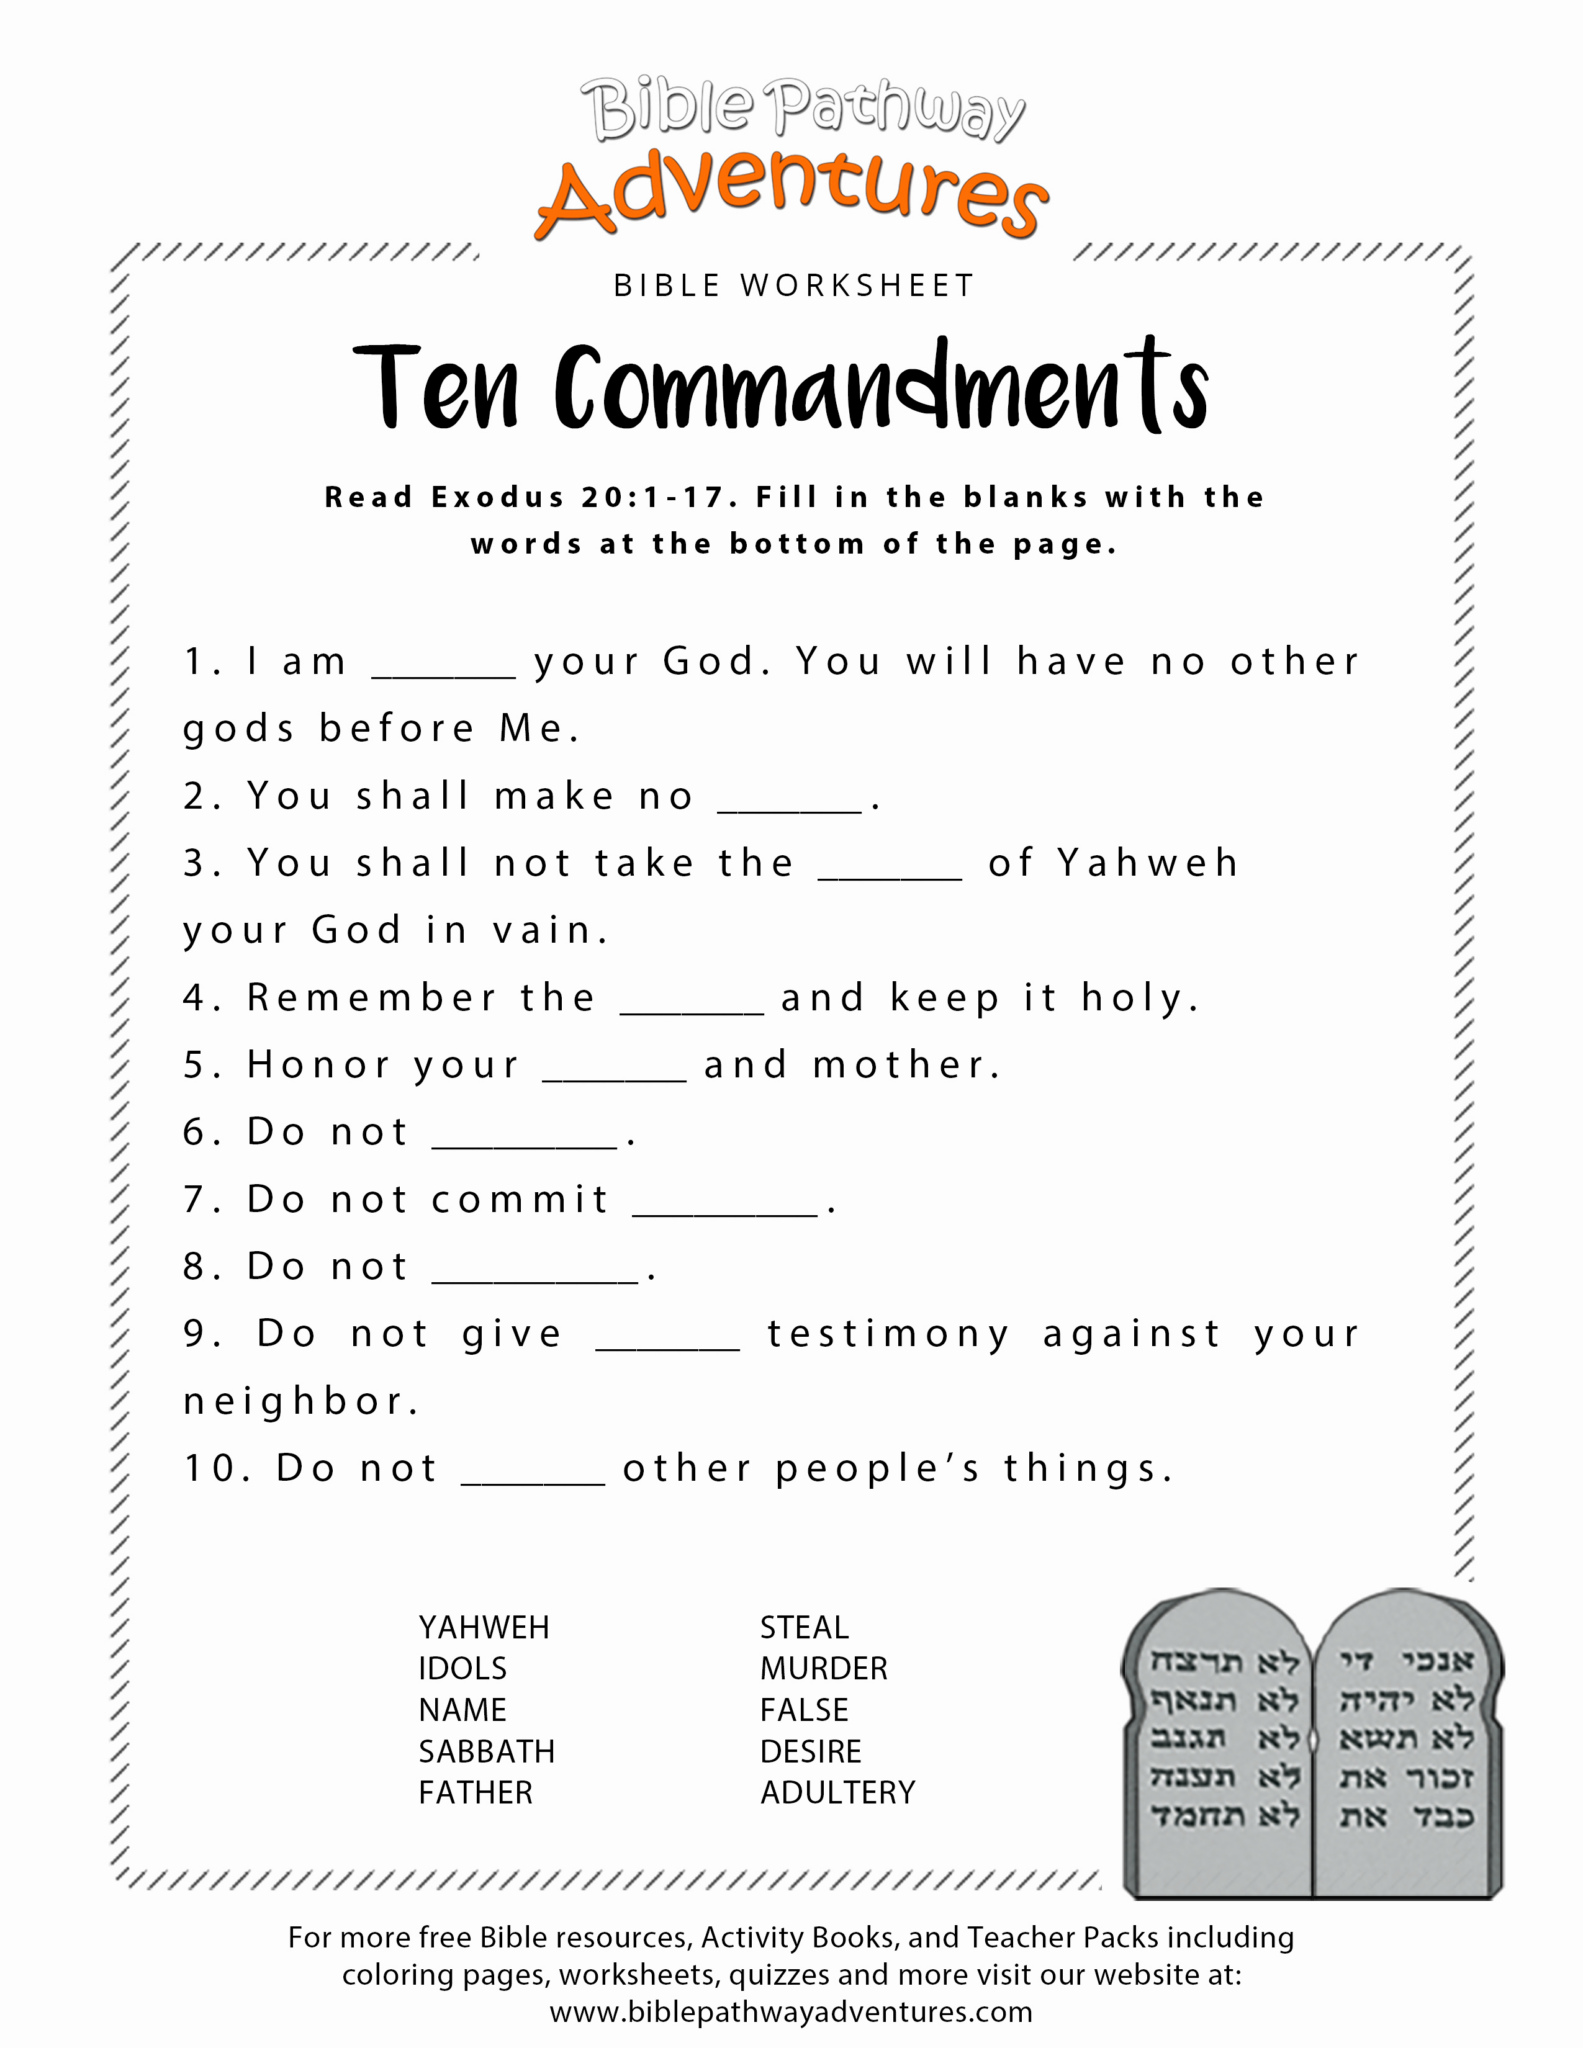 free-printable-bible-lessons-for-youth-pdf-printable-worksheets